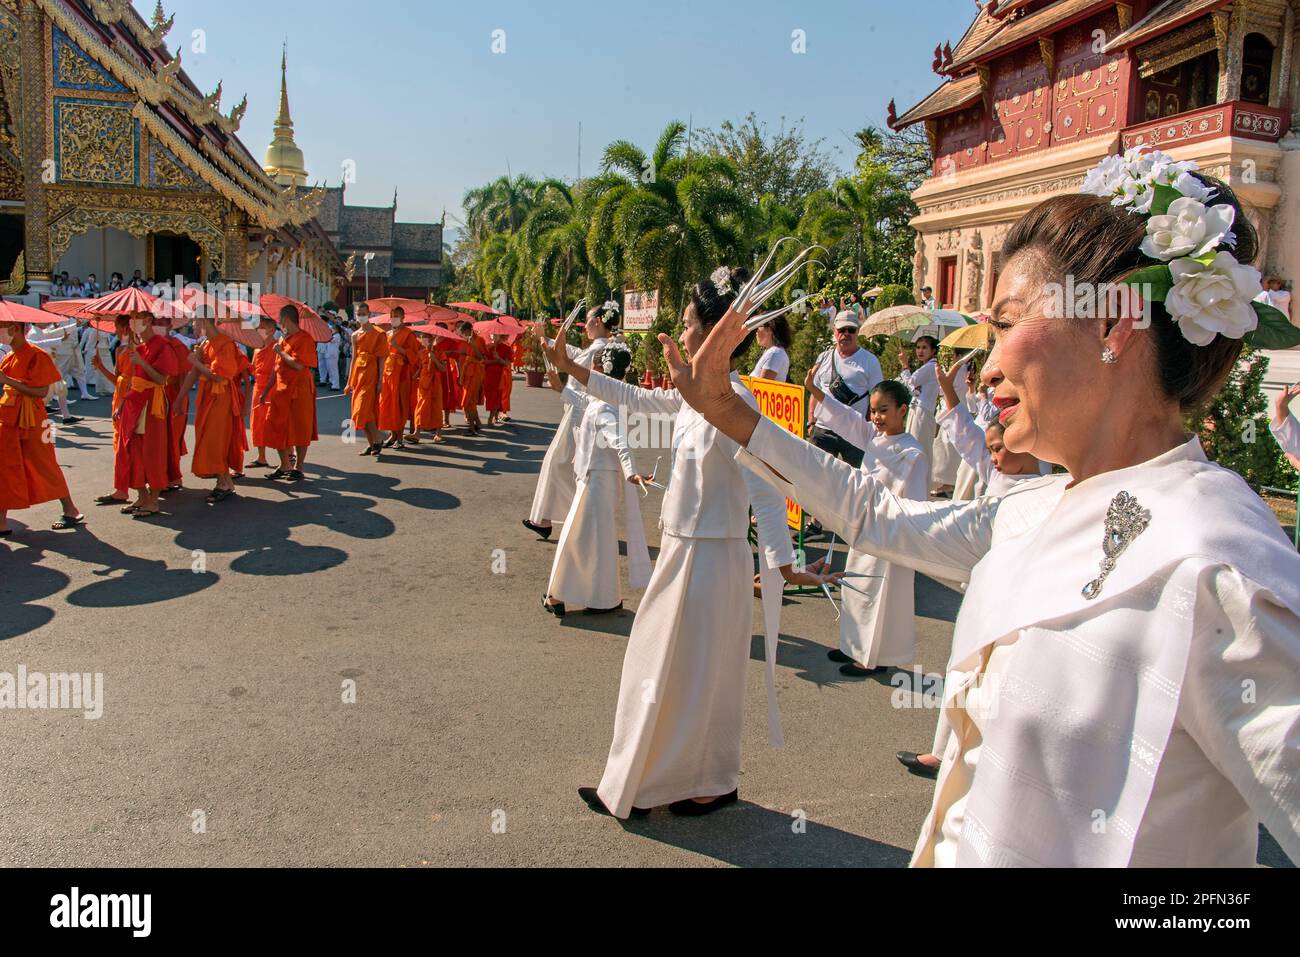 Monks and Fon lep  fingernail dancers, funeral procession from Wat Phra Singh, Chiang Mai Thailand Stock Photo